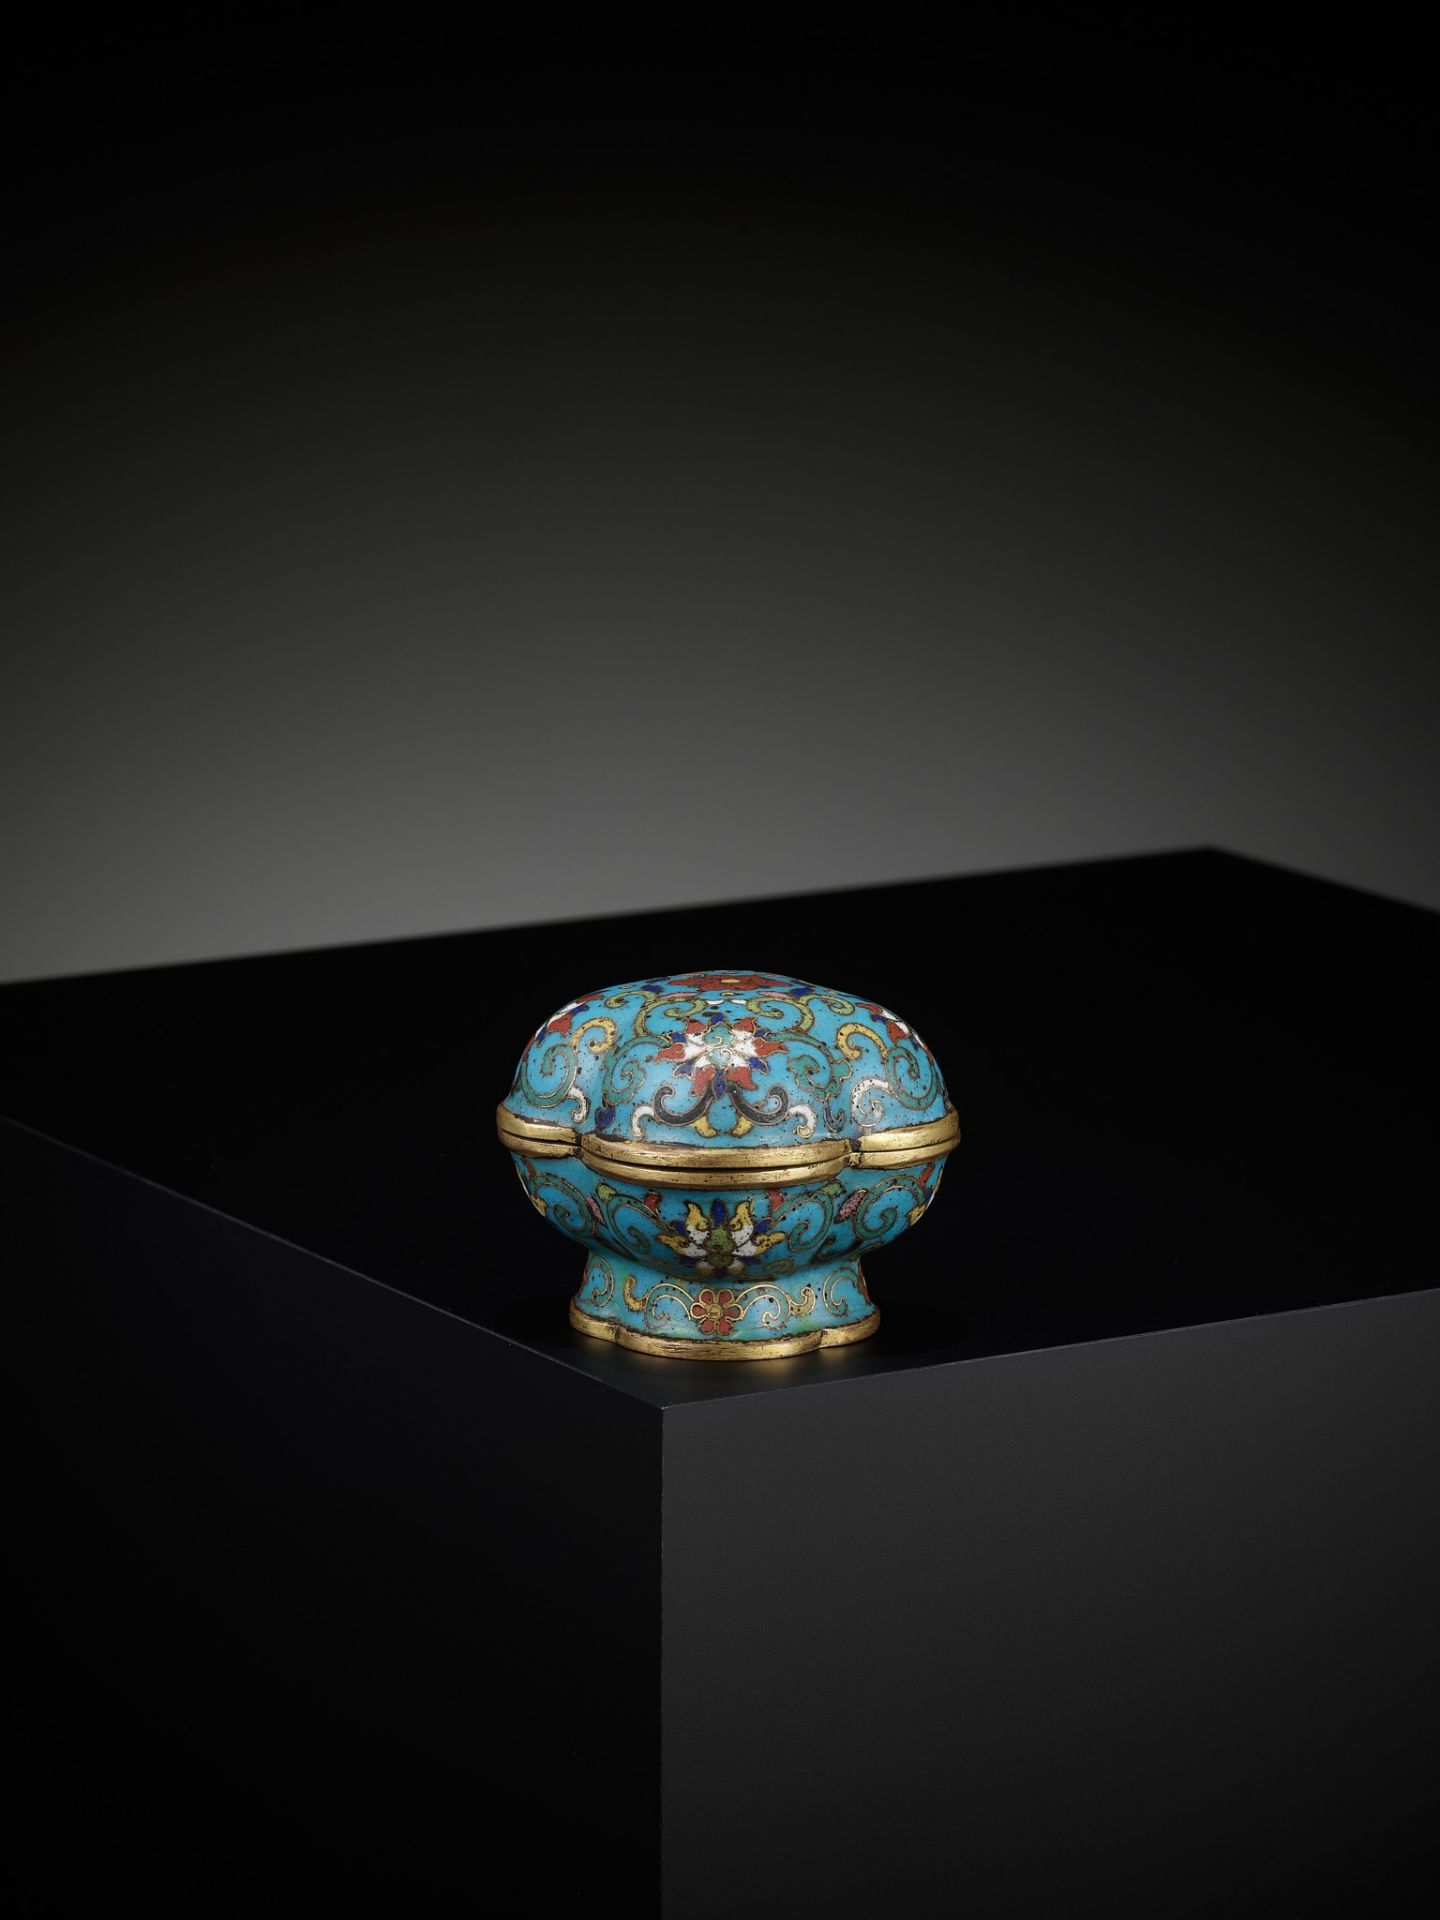 AN EXTREMELY RARE CLOISONNE ENAMEL QUADRILOBED BOX AND COVER, QIANLONG MARK AND OF THE PERIOD - Image 2 of 21